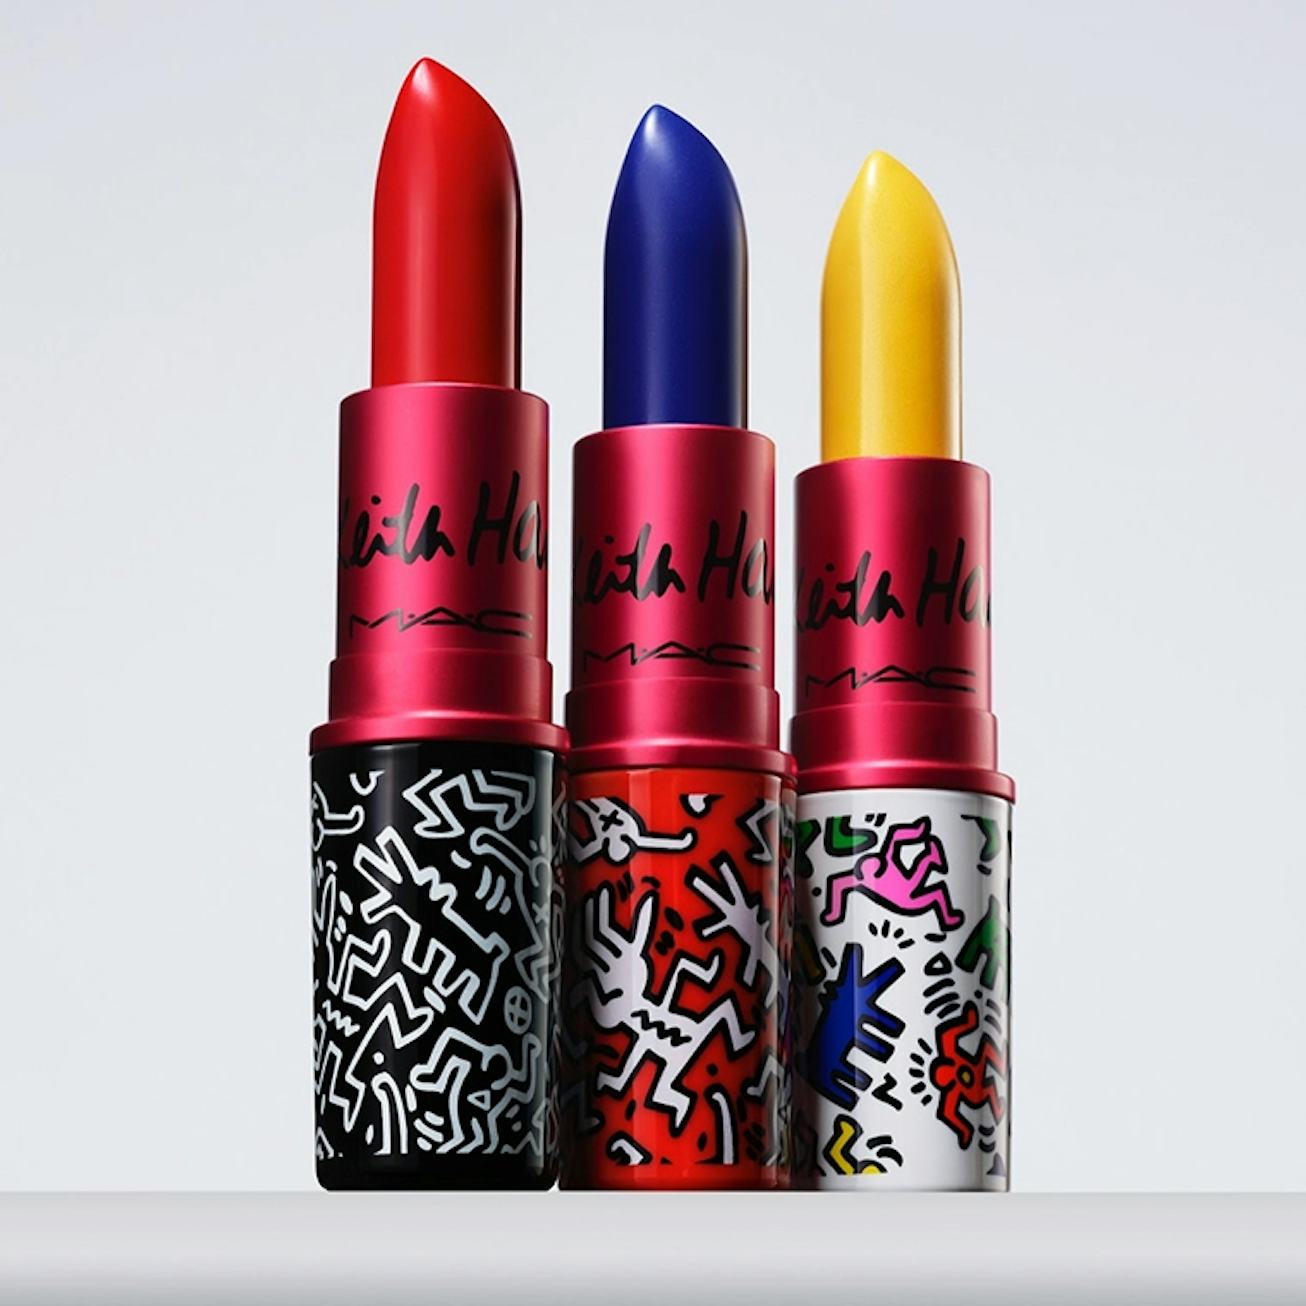 Red, blue and yellow MAC’s Viva Glam x Keith Haring Lipsticks in front of the white background